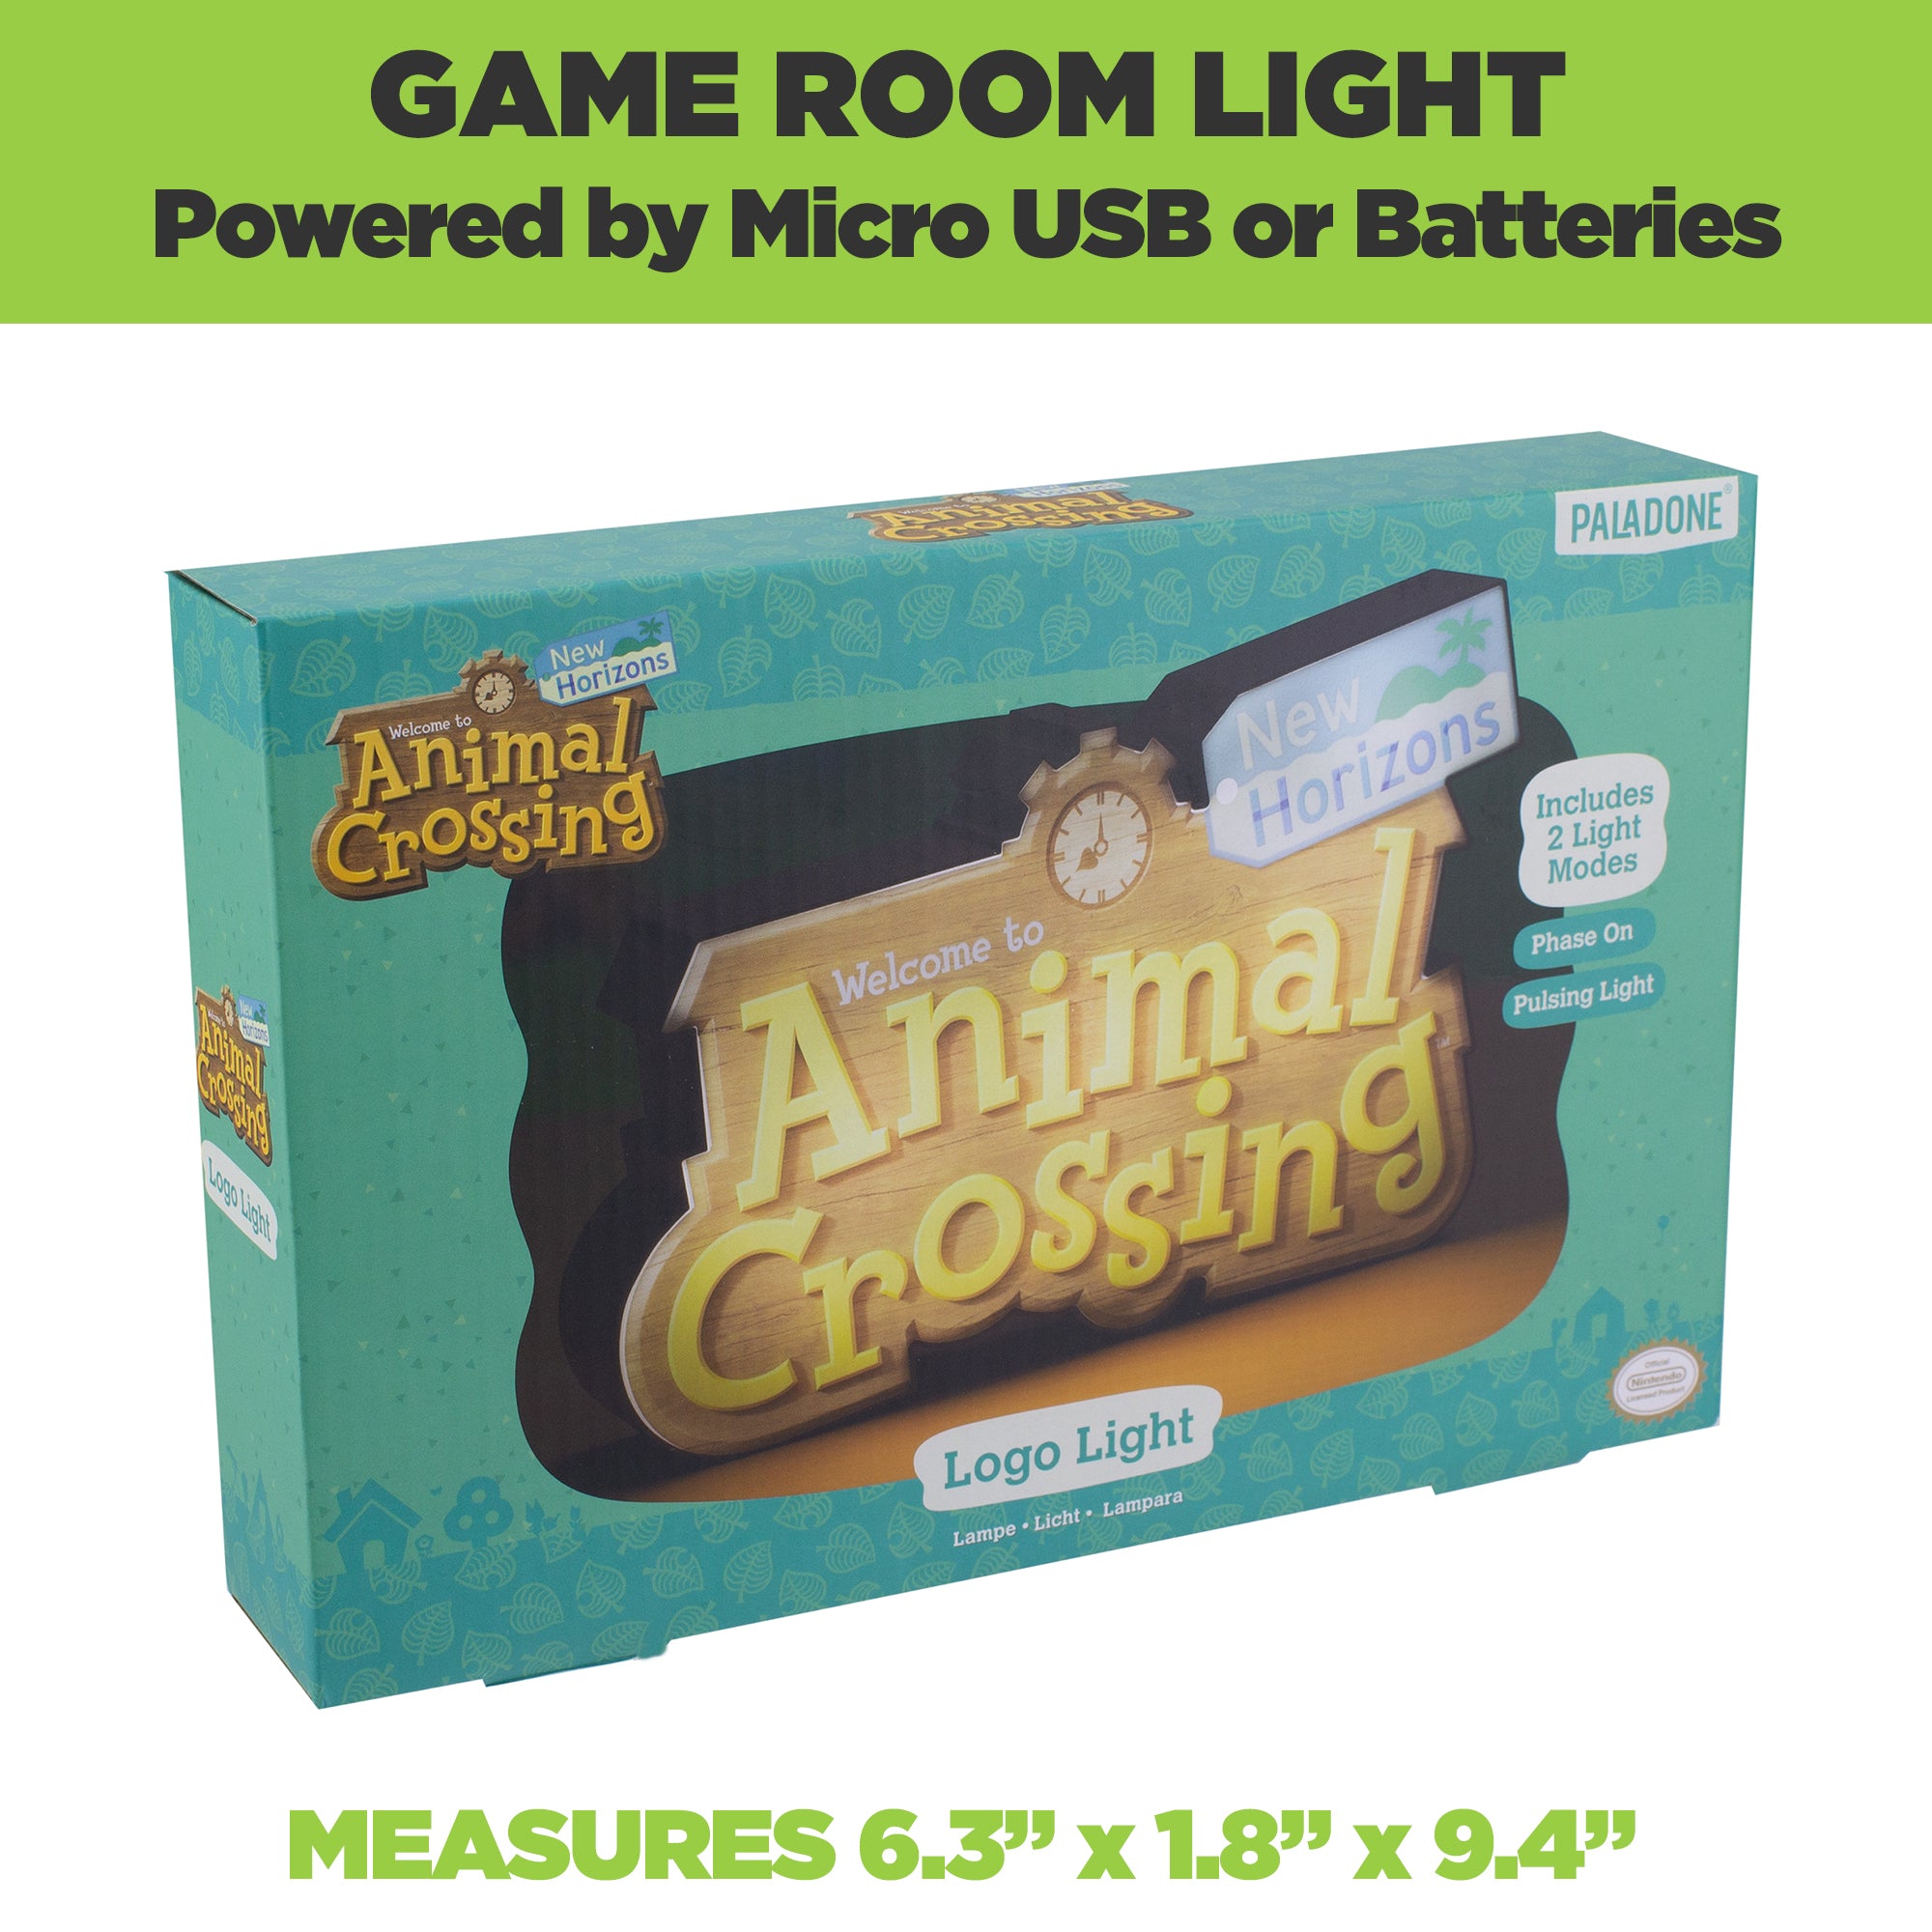 Nintendo game room light powered by USB cable or batteries in Paladone package. Sold by HIDEit Mounts.